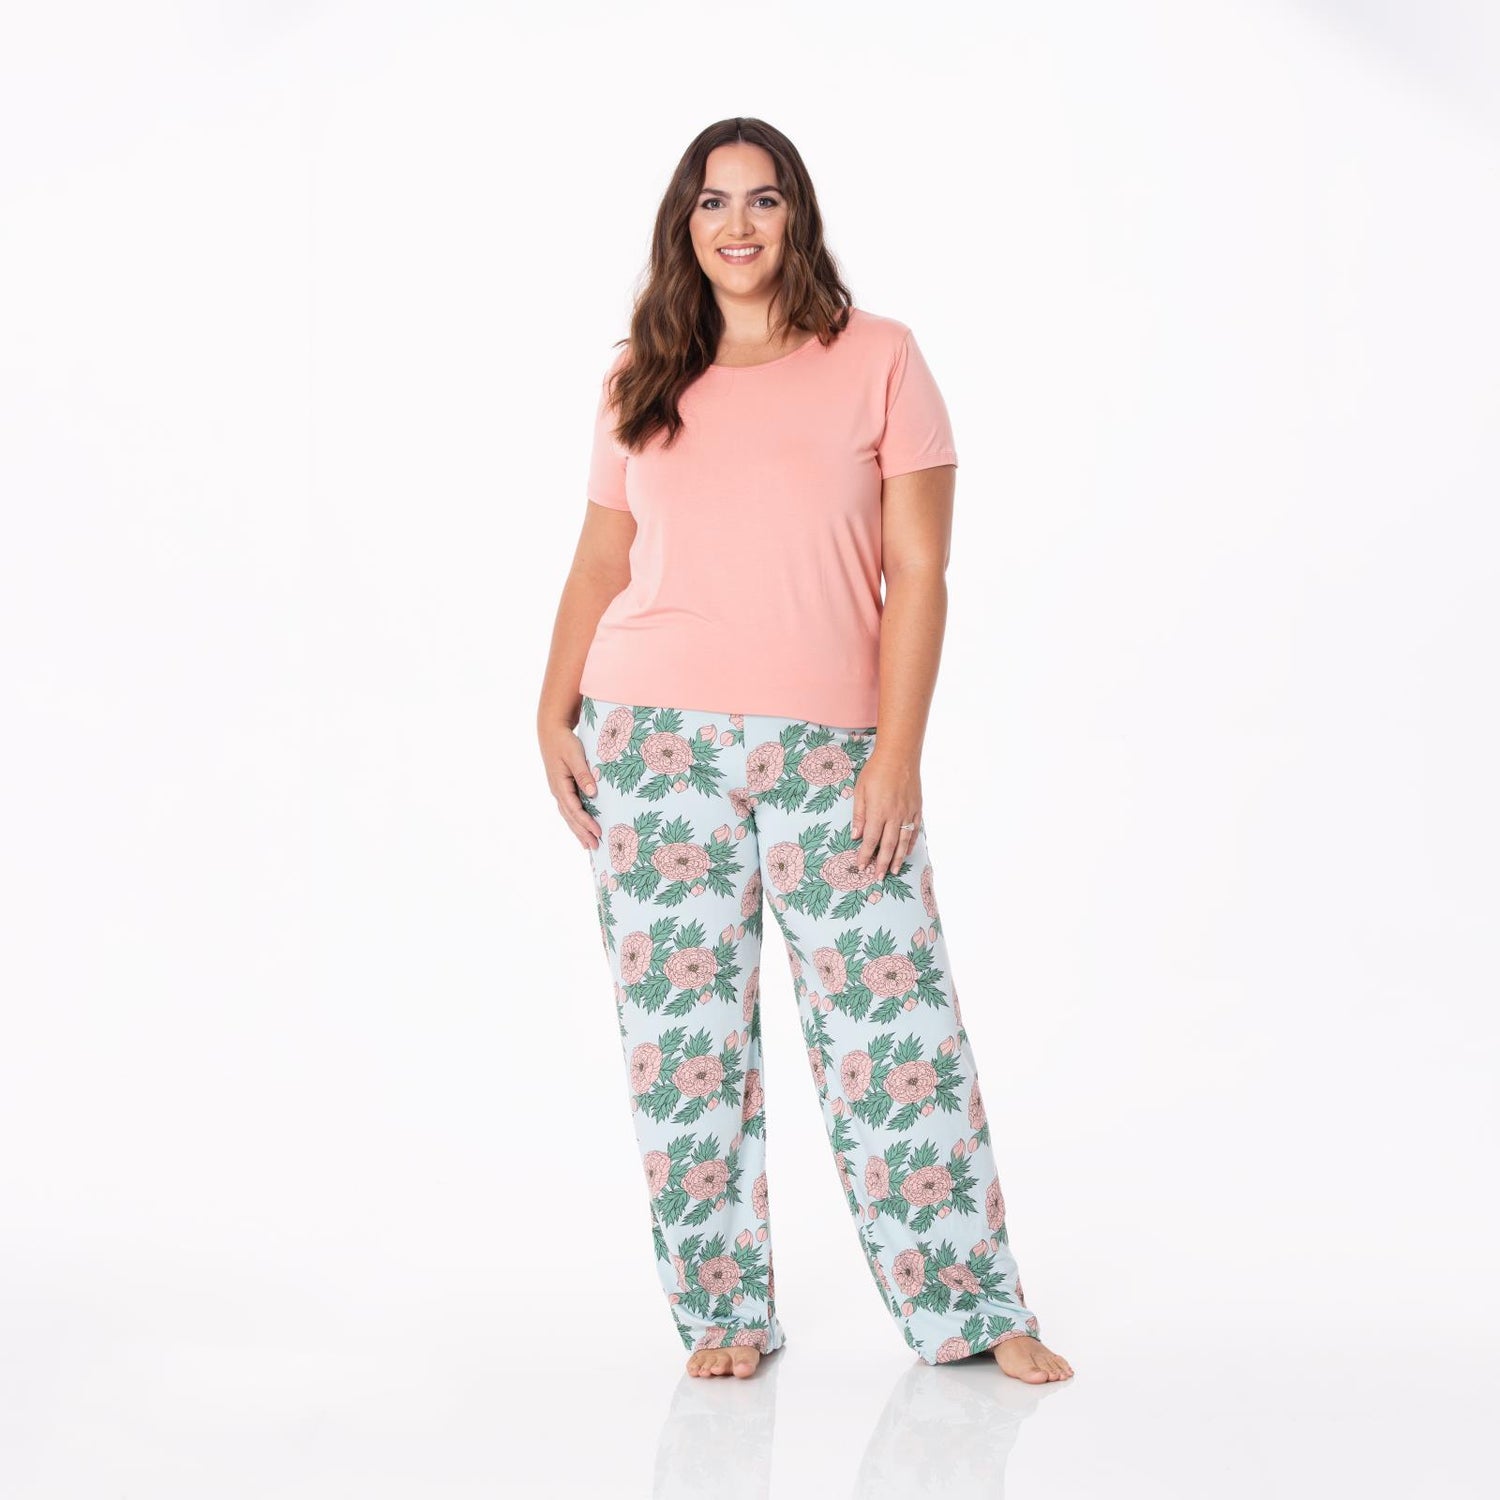 Women's Print Short Sleeve Relaxed Tee & Pajama Pants Set in Spring Sky Floral